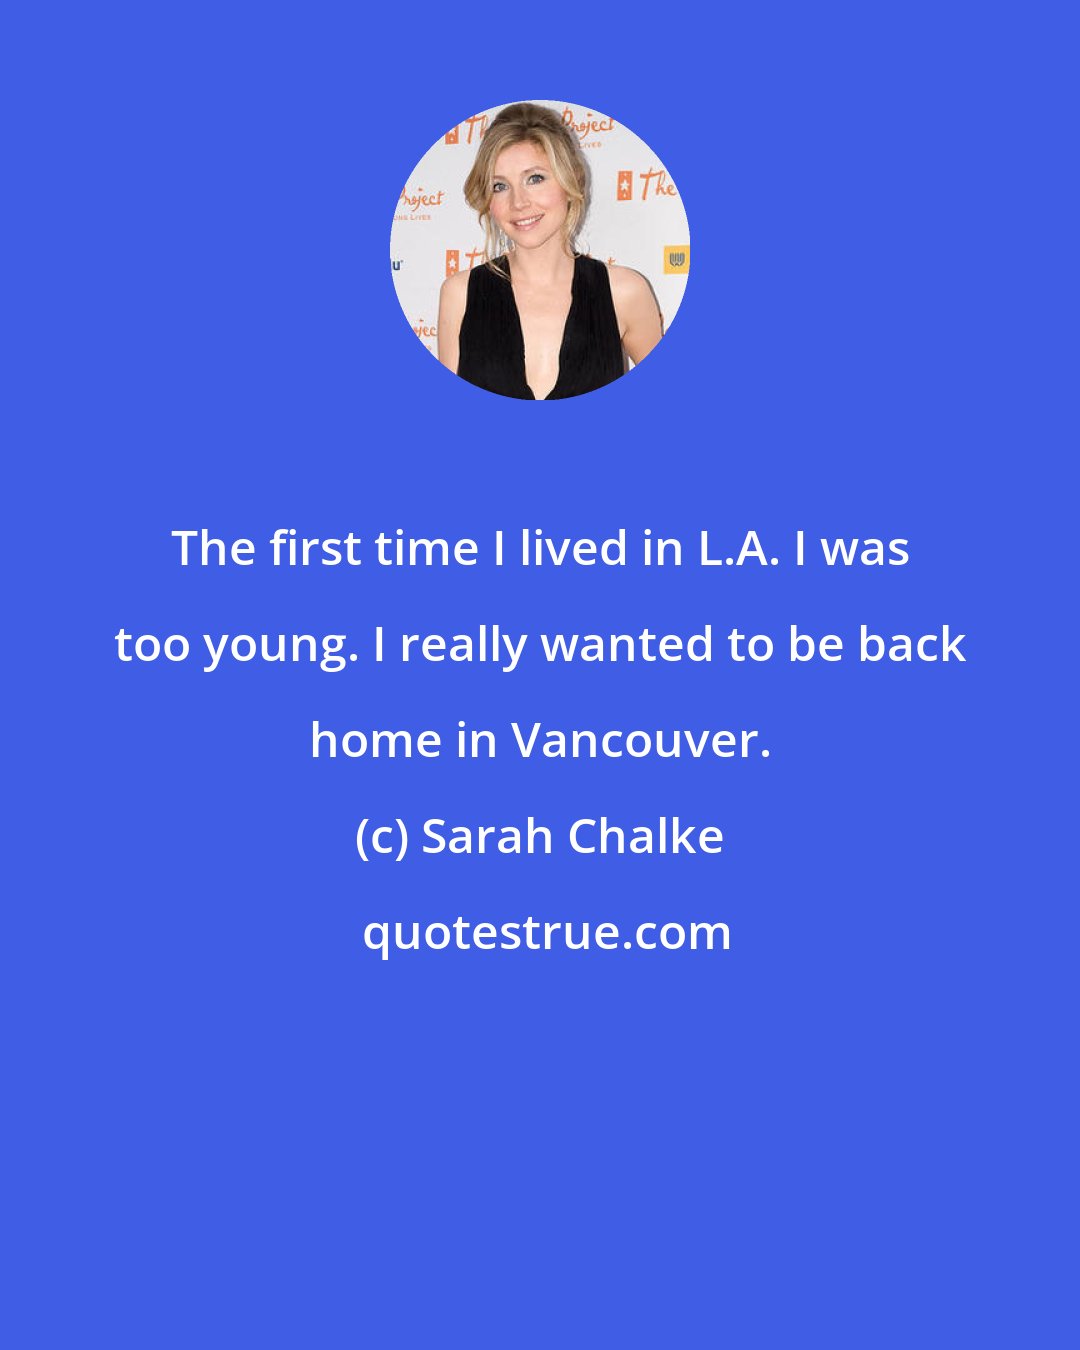 Sarah Chalke: The first time I lived in L.A. I was too young. I really wanted to be back home in Vancouver.